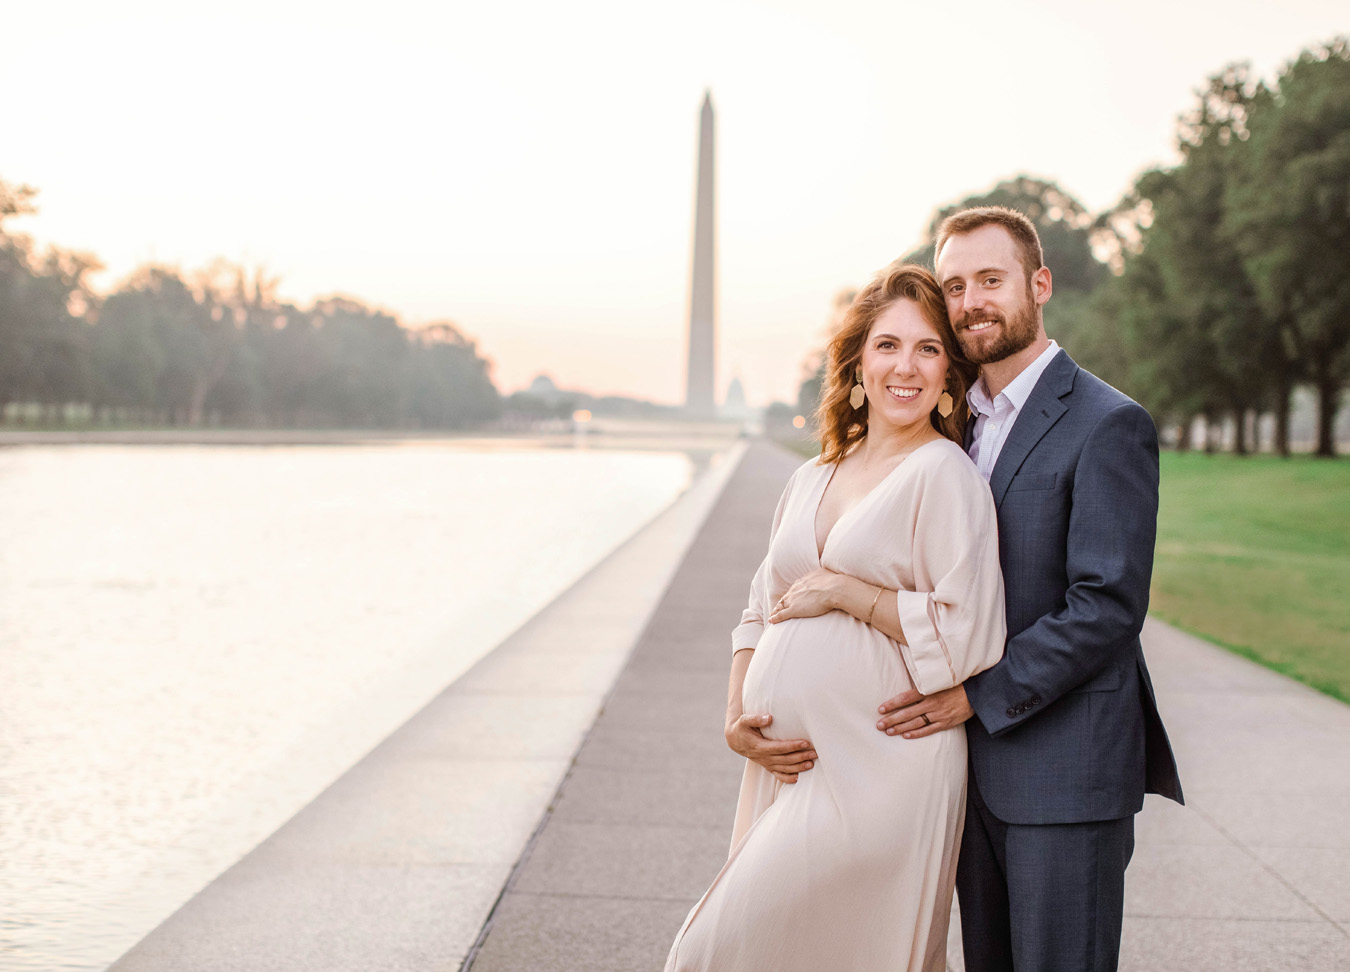 A husband and wife smiling while posing for their maternity images with the National Monument in the background